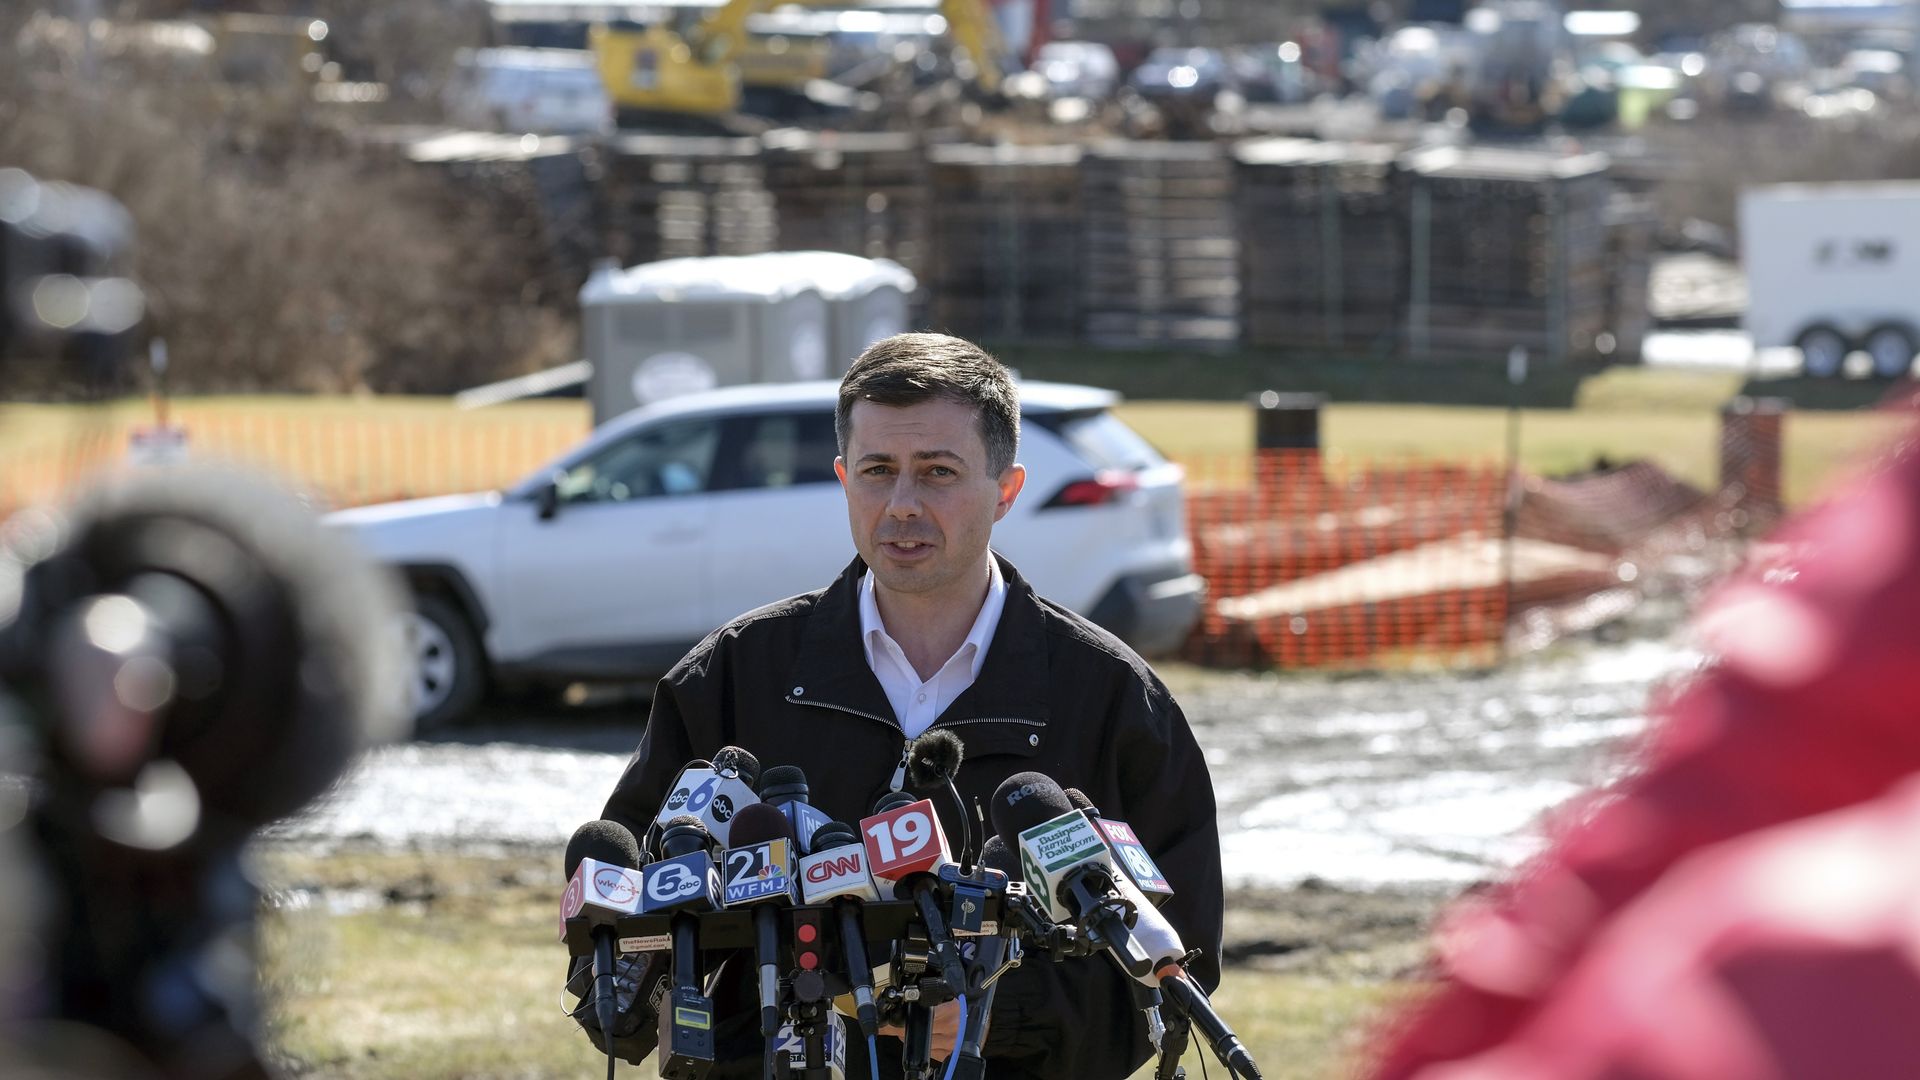 Pete Buttigieg, US transportation secretary, center right, speaks during a news conference near the site of the Norfolk Southern train derailment in East Palestine, Ohio, US, on Thursday, Feb. 23.